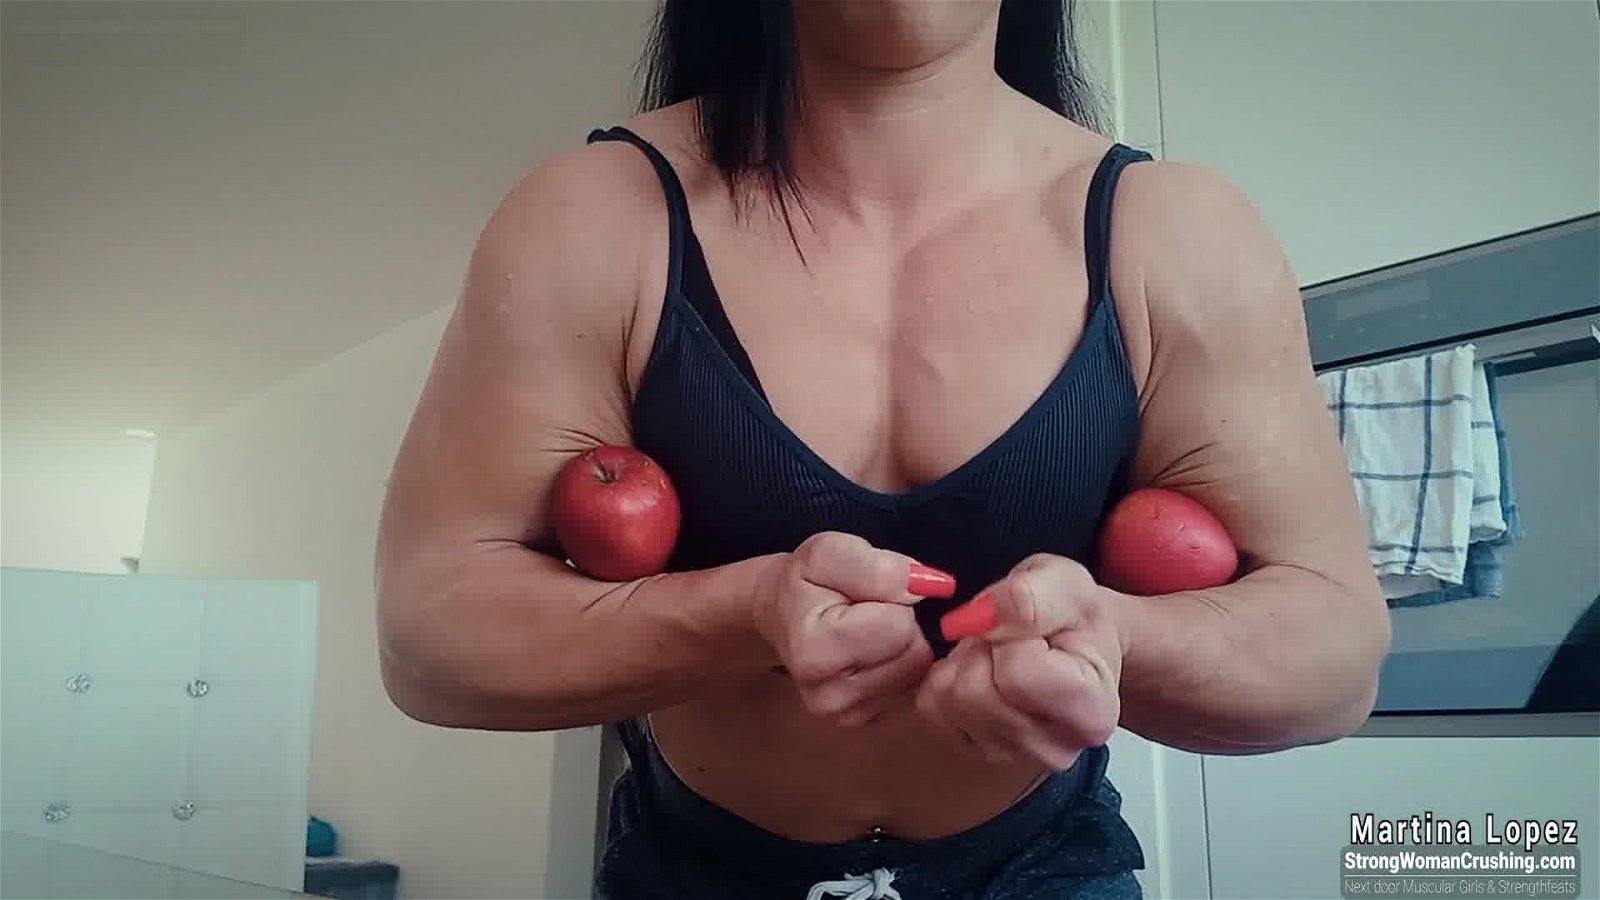 Photo by MusclegirlStrength with the username @MusclegirlStrength, who is a brand user,  February 2, 2024 at 3:58 PM and the text says 'Unleashing Her Apple Juice Power: Watch Martina Lopez's Insane Muscle Feats!
Full Video: https://bit.ly/3yffXJT

Experience the awe-inspiring power and sensuality of Martina Lopez and other muscular female bodybuilders as they flex, bend metal, lift..'